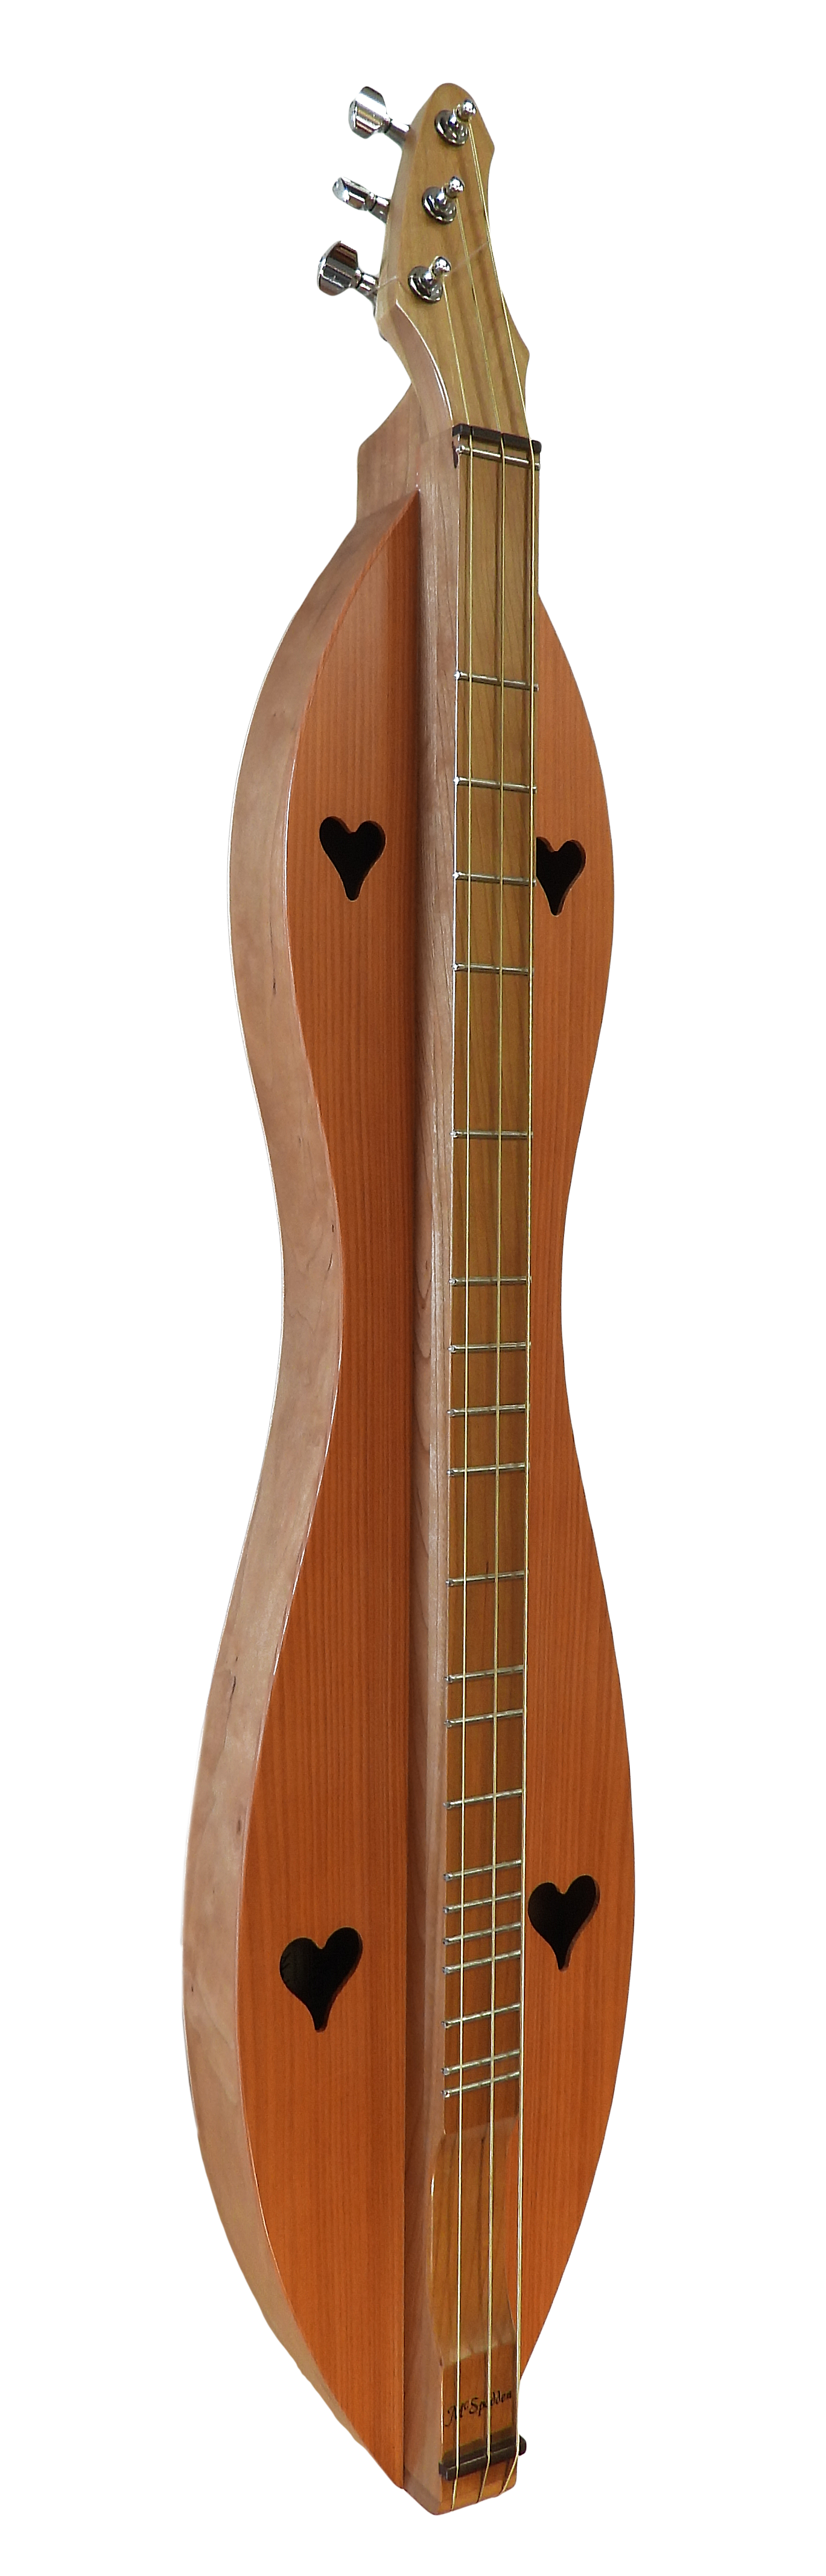 A 3 String Bass, Flathead, Hourglass Dulcimer Cherry back and sides, Redwood Top (3FHCR) with two wings on it and a lifetime warranty.